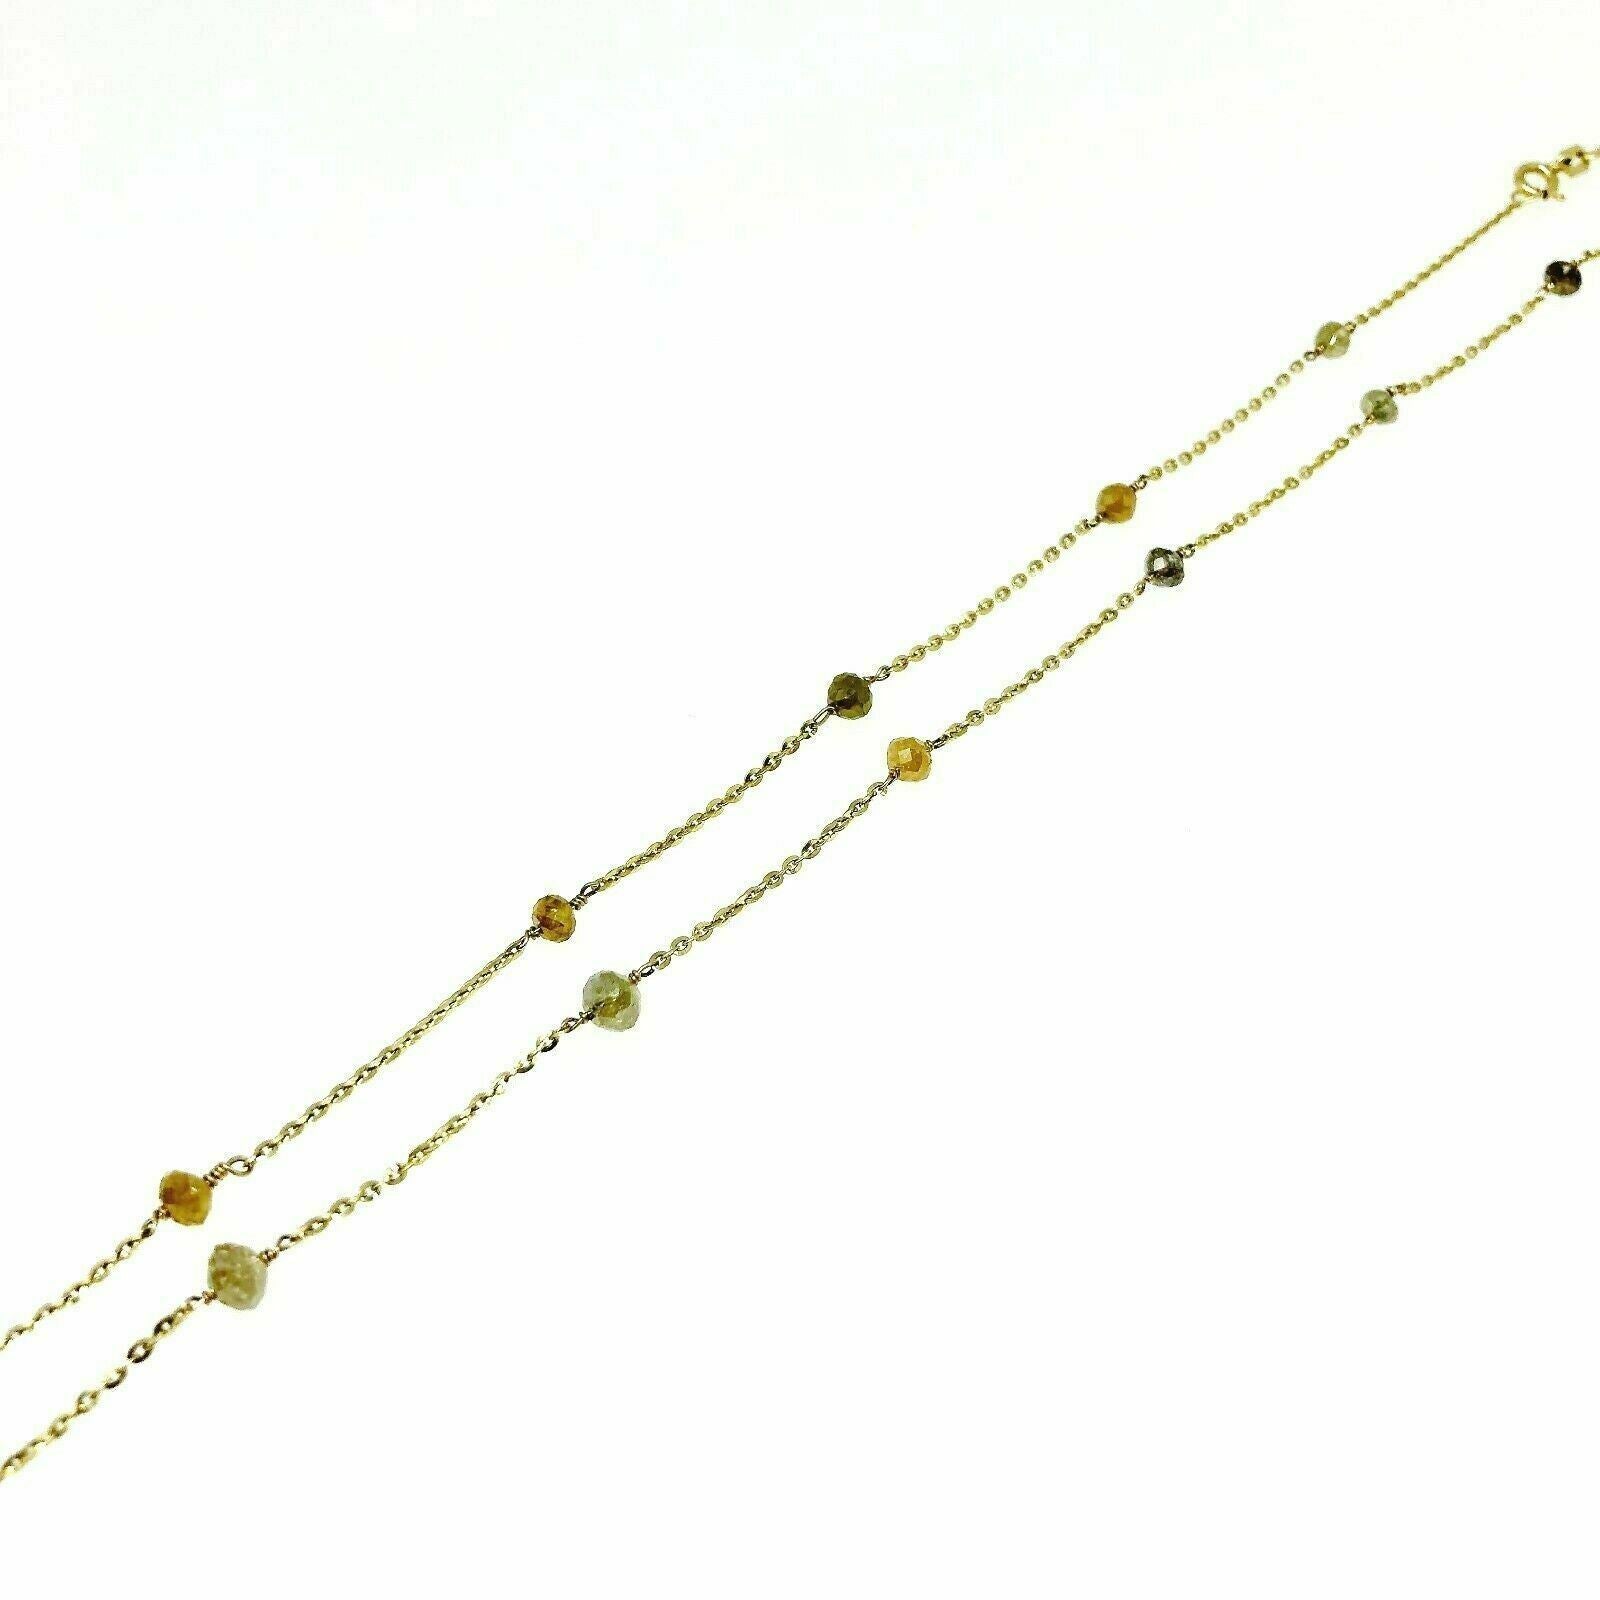 Hand Made 8.70 Carats Natural Rough Diamond By The Yard Necklace 14k Yellow Gold